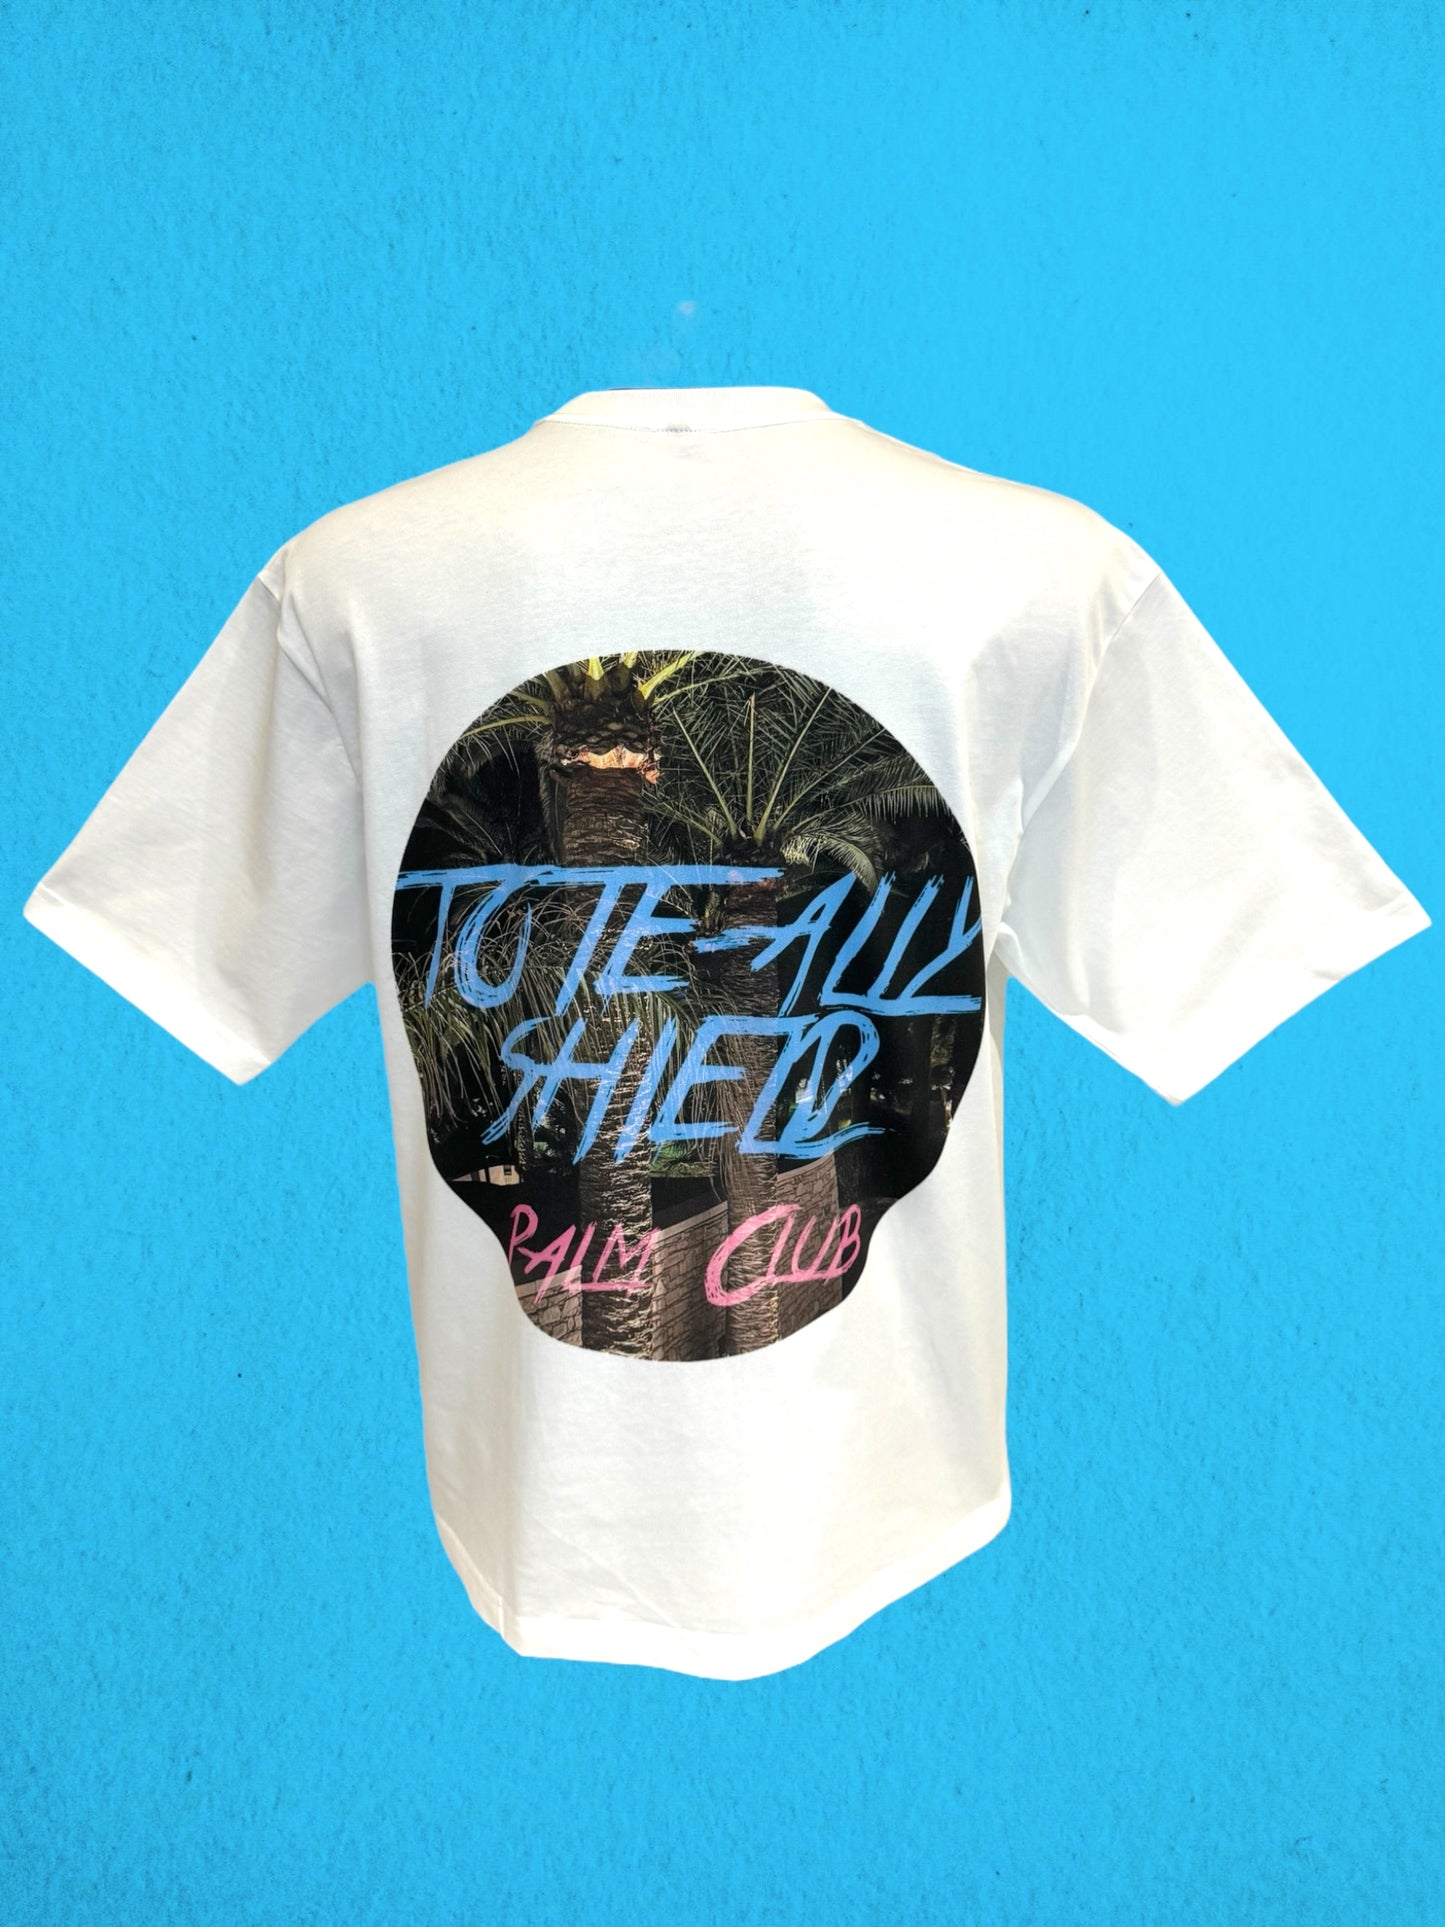 Back view of white short-sleeved, boxy-fit, heavyweight T-shirt featuring a large center-back graphic print. The ‘PALM CLUB’ design showcases a summer palm tree escape in a circular shape, with baby blue text highlighting the ‘TOTE-ALLY SHIELD’ logo and hot pink text highlighting 'PALM CLUB'.